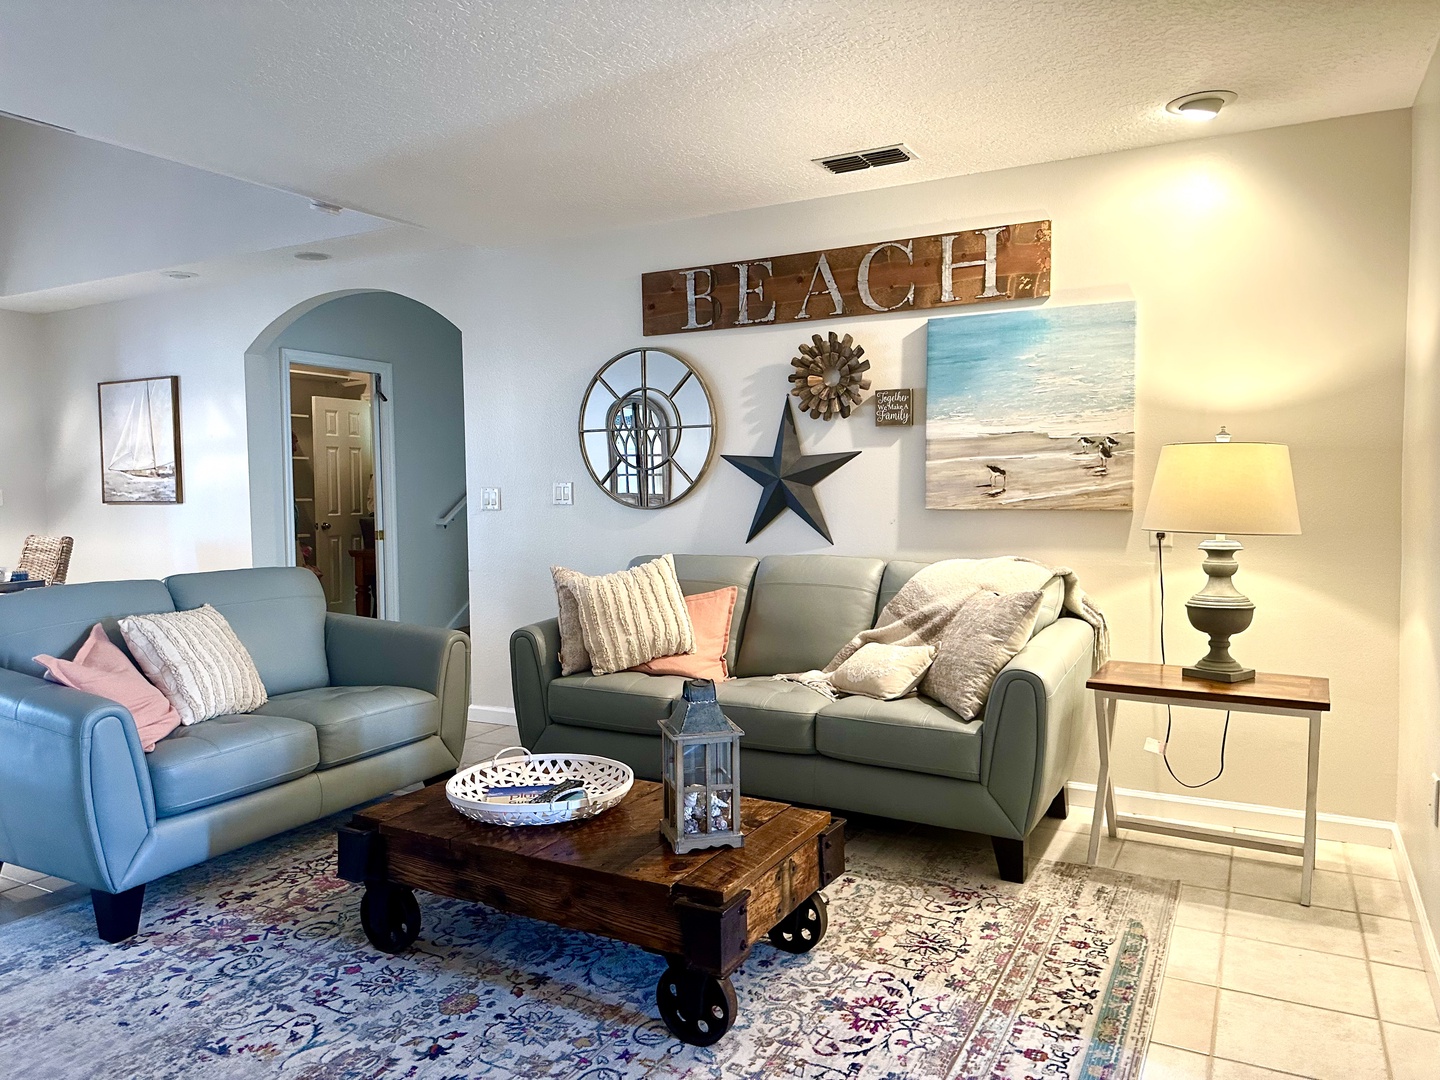 The family room is a great place to relax after a day at the beach.